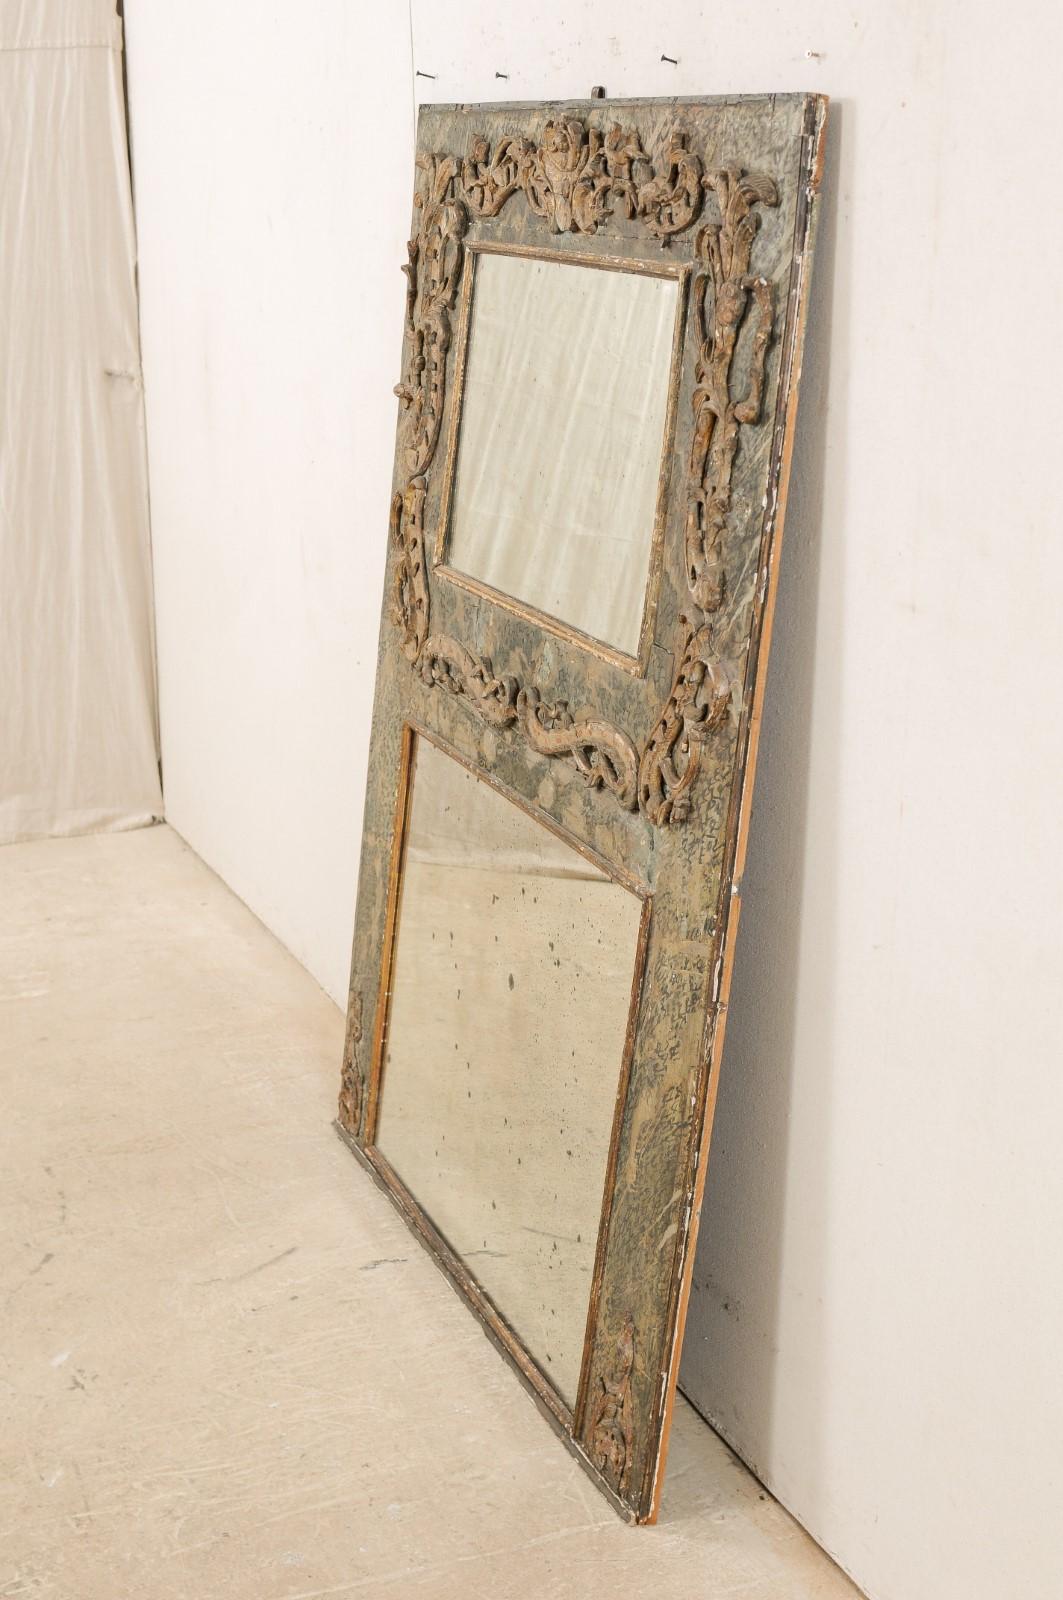 Italian Period Baroque Mirror with It's Original or Early Paint, Tall 4